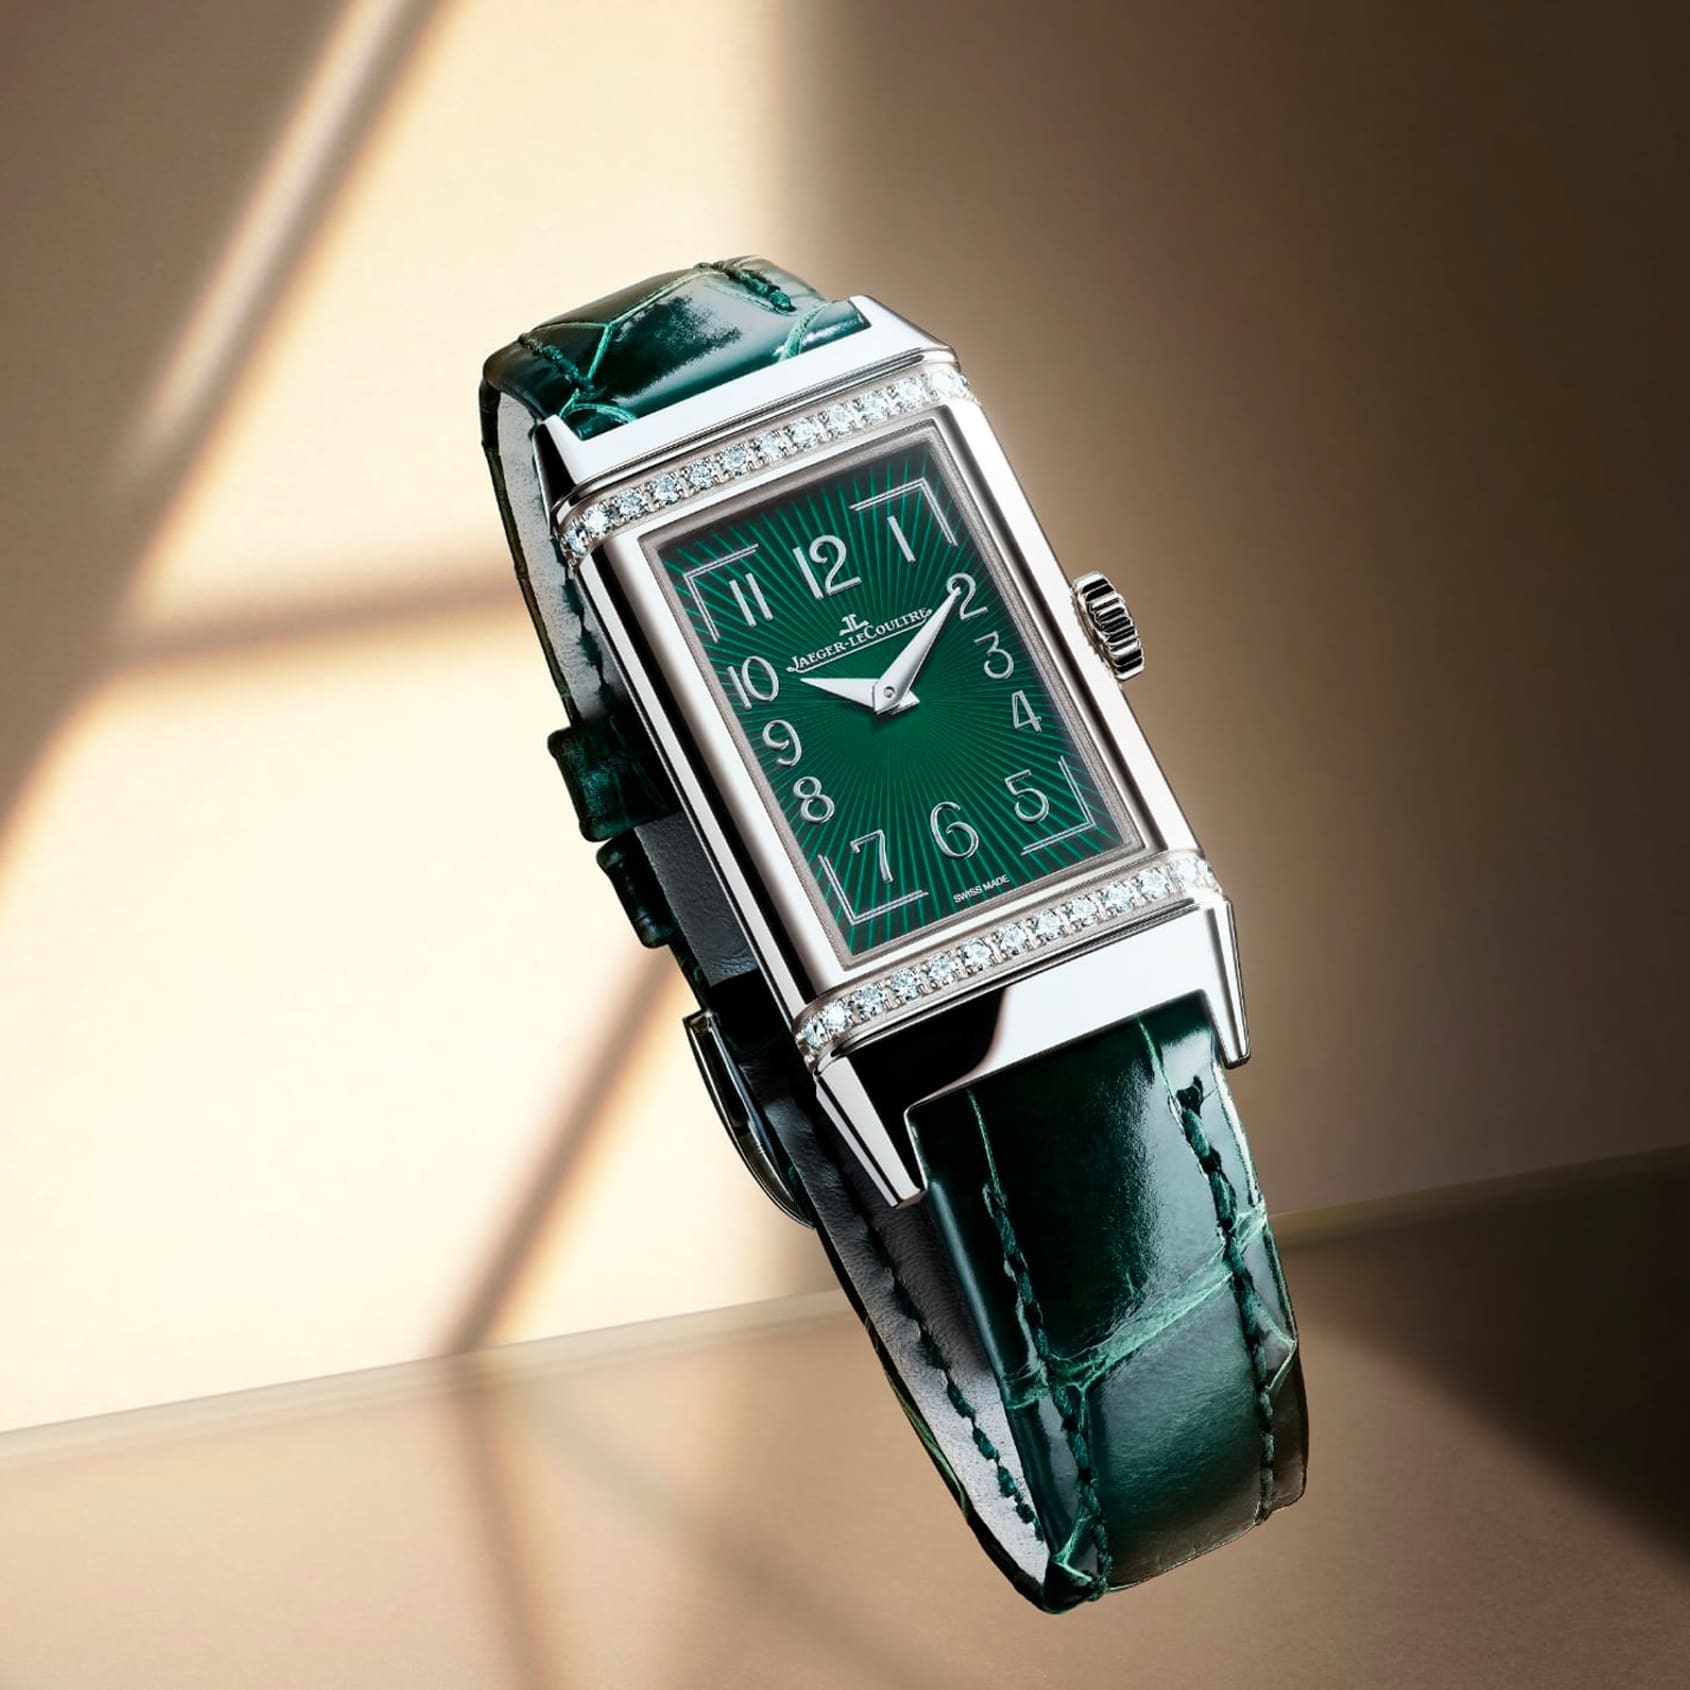 INTRODUCING: The Jaeger-LeCoultre Reverso One in green